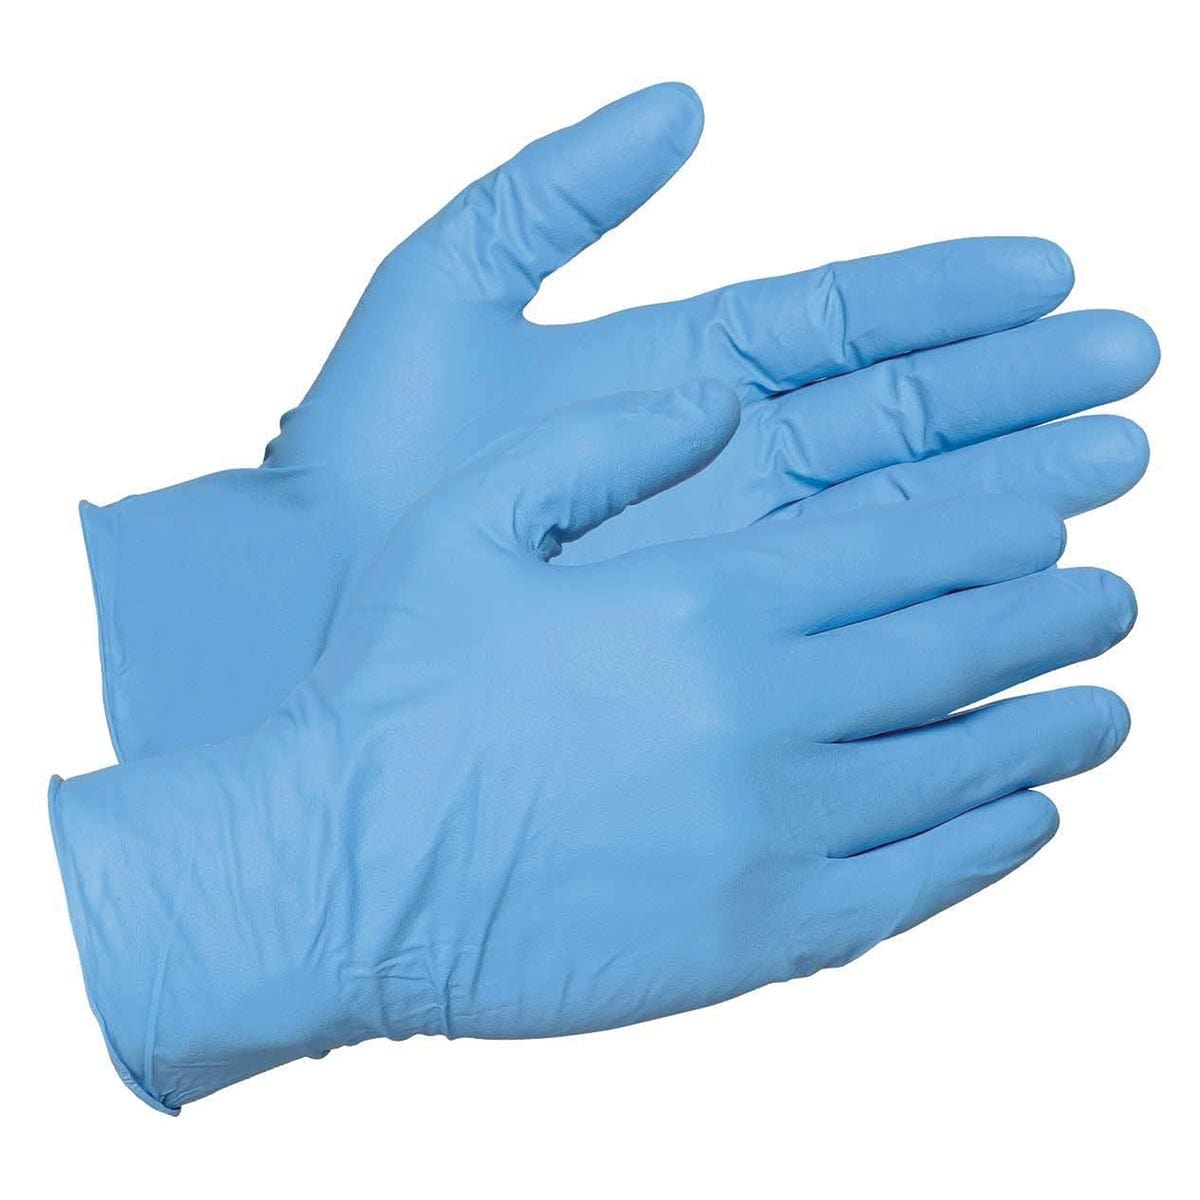 Gemplers 4-mil Small Disposable Nitrile Gloves, Bucket of 500